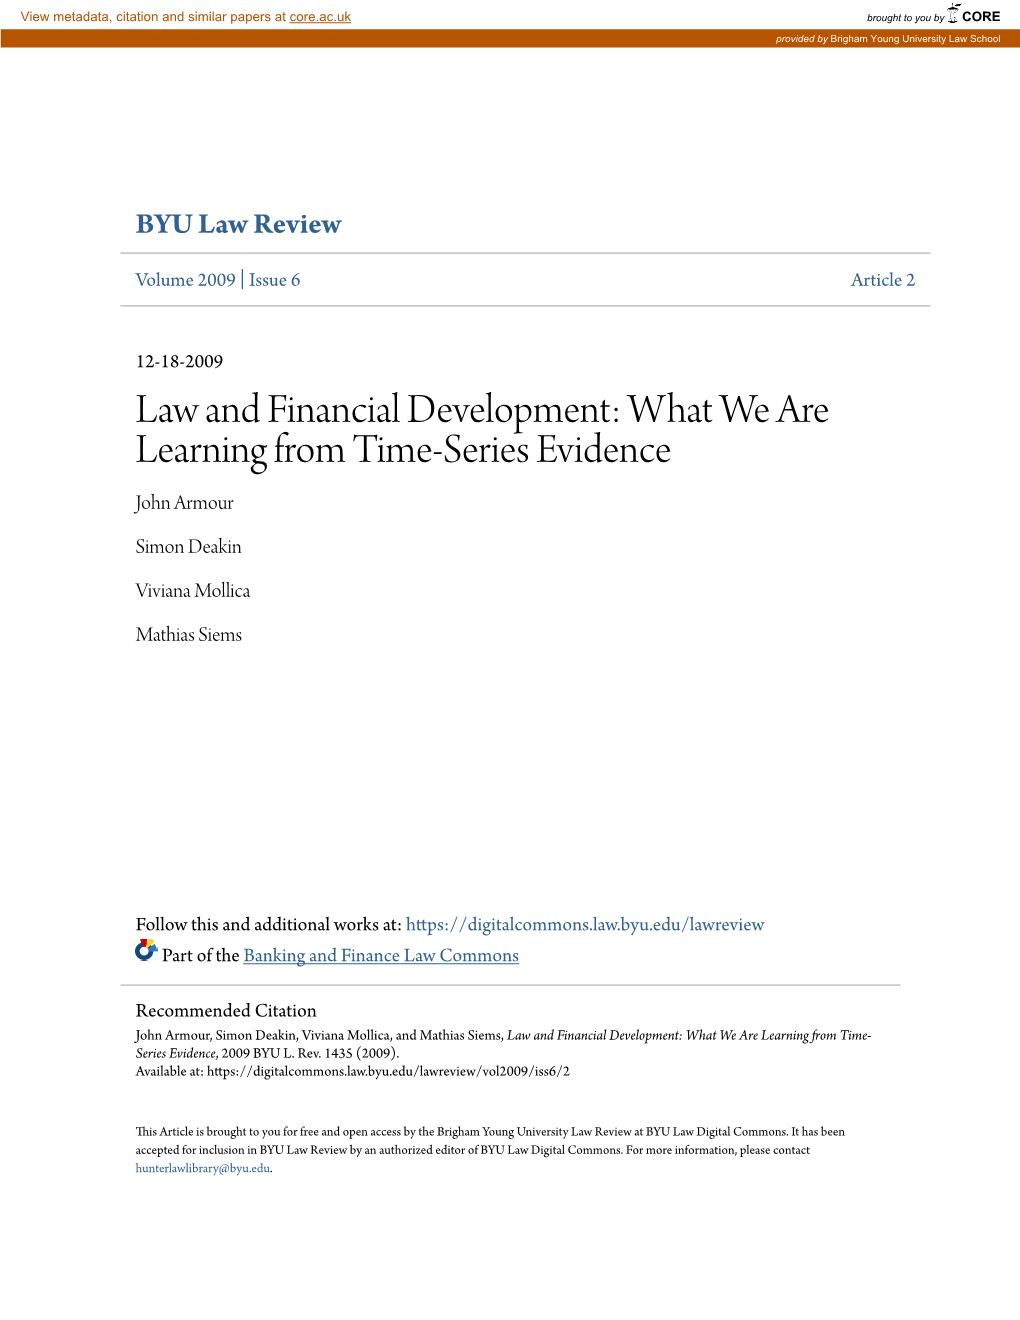 Law and Financial Development: What We Are Learning from Time-Series Evidence John Armour